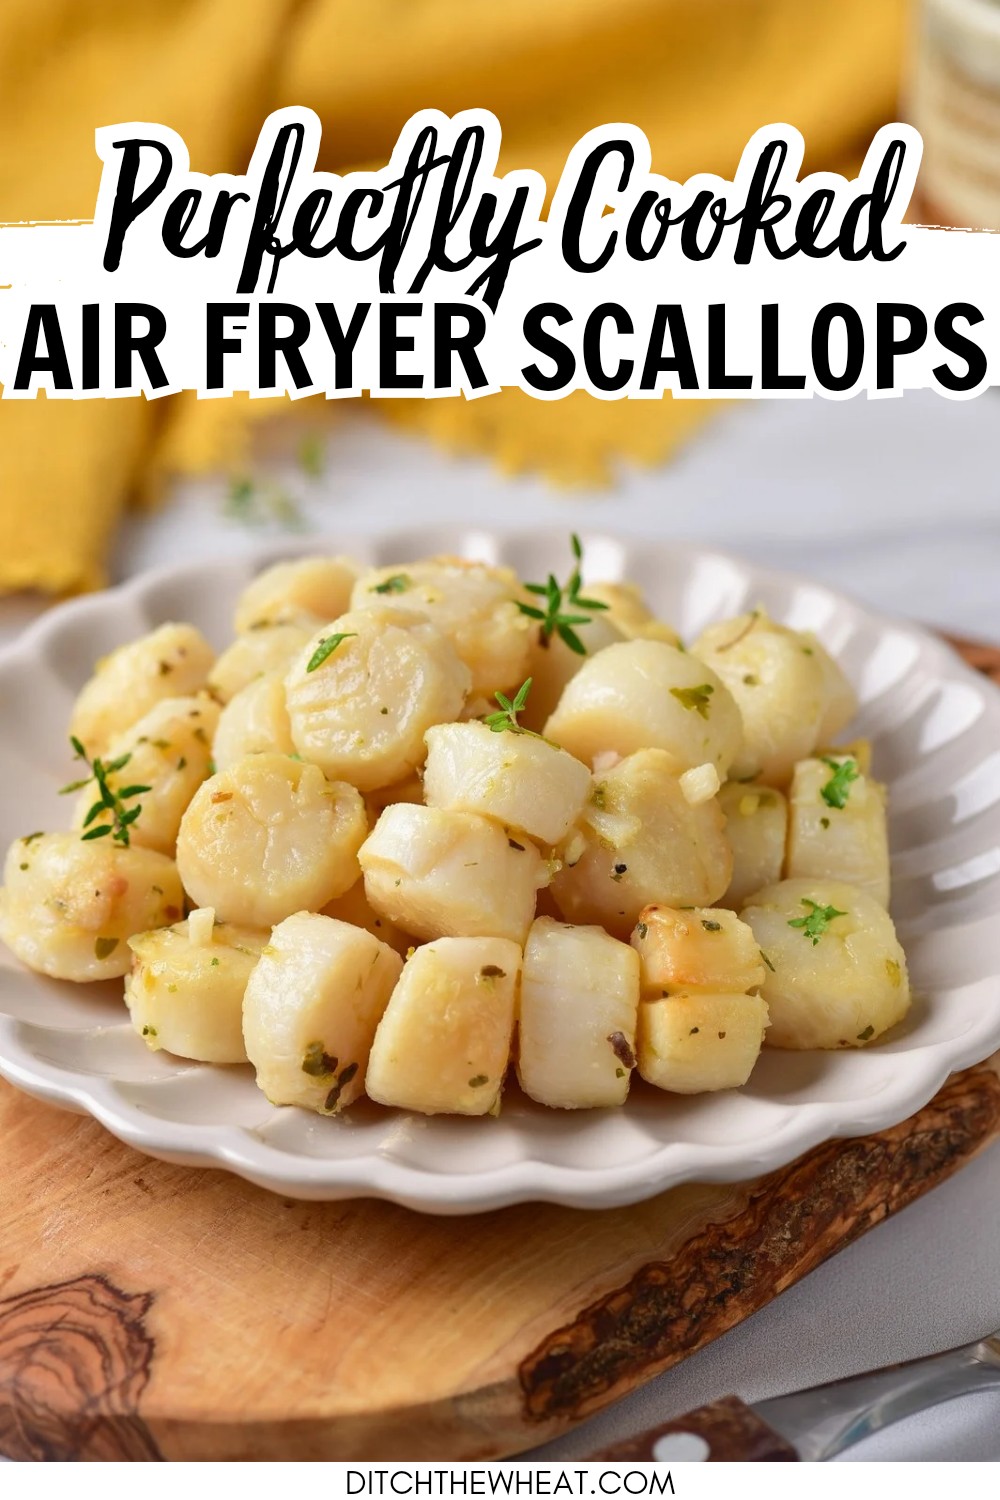 A white plate with air fryer scallops on a wooden cutting board and a yellow napkin in the background.